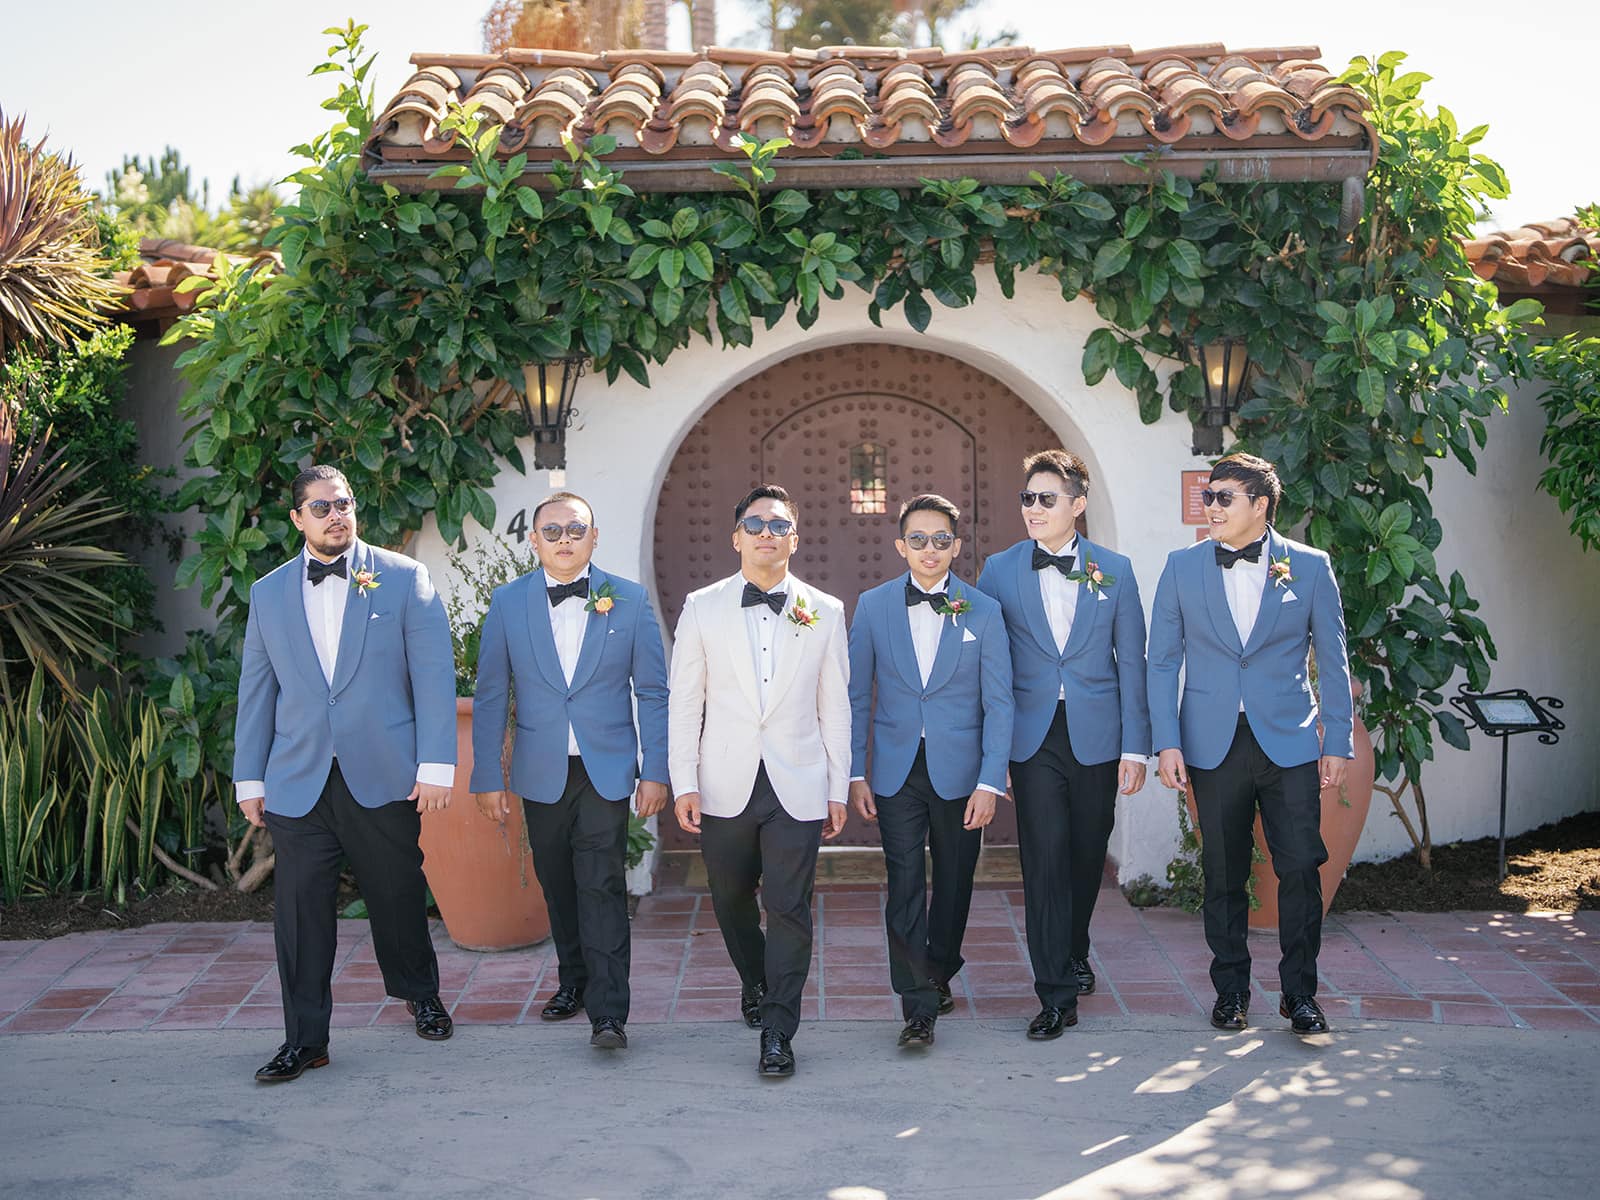 The groomsmen with sunglasses standing side by side in front of a San Clemente wedding venue